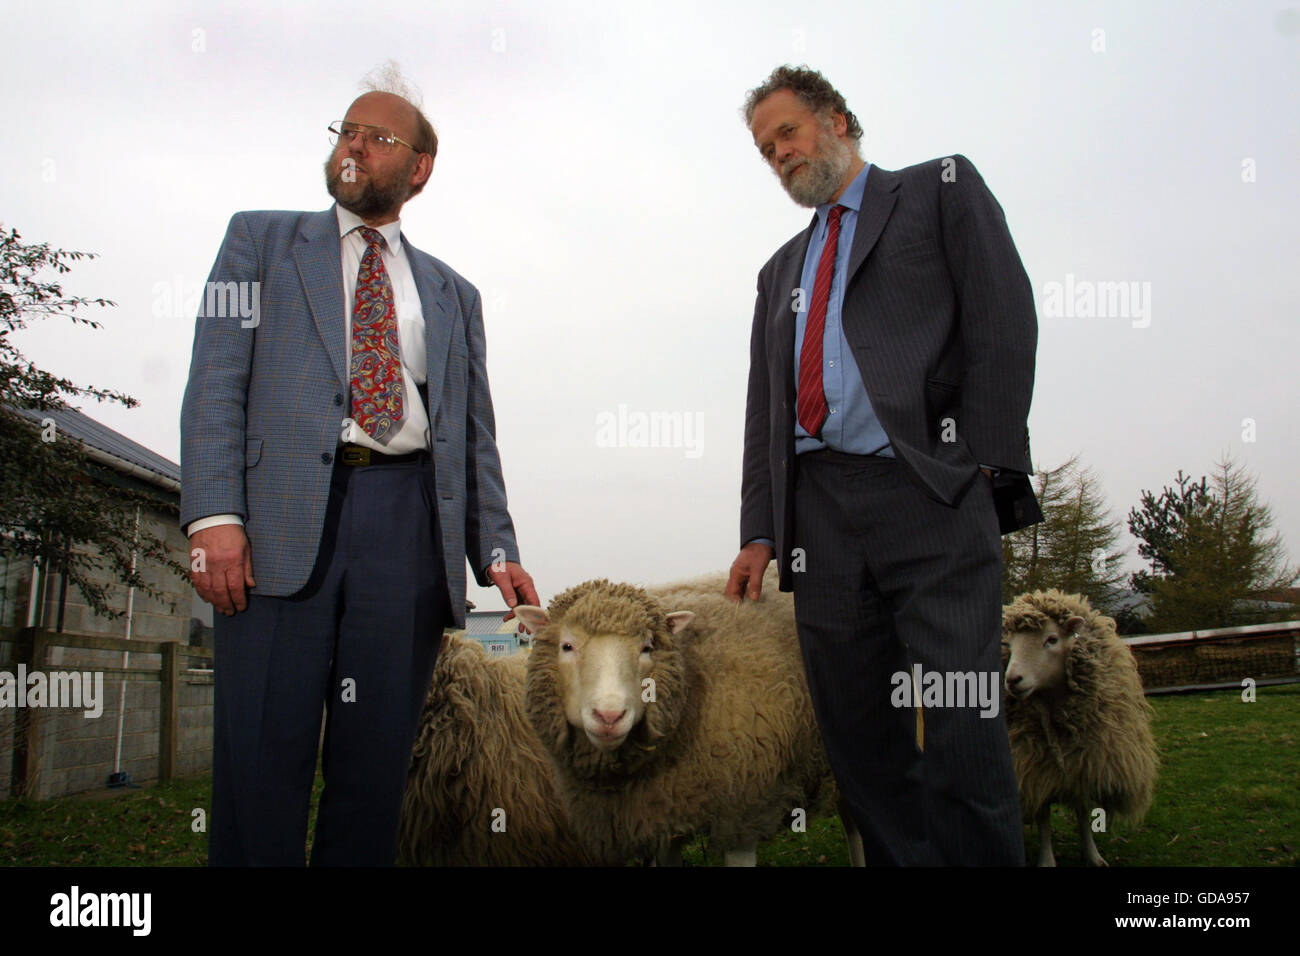 Dr Ian Wilmut (left) and Dr Harry Griffin, two of the scientists behind the development of Dolly (pictured), the first genetically copied sheep, at Roslin Institute near Edinburgh where they work. Dolly was a female domestic sheep, and the first mammal cloned from an adult somatic cell, using the process of nuclear transfer. The photographs taken by Colin McPherson this day were the last before Dolly was euthanised  on 14 February 2003 because she had a progressive lung disease and severe arthritis. Stock Photo